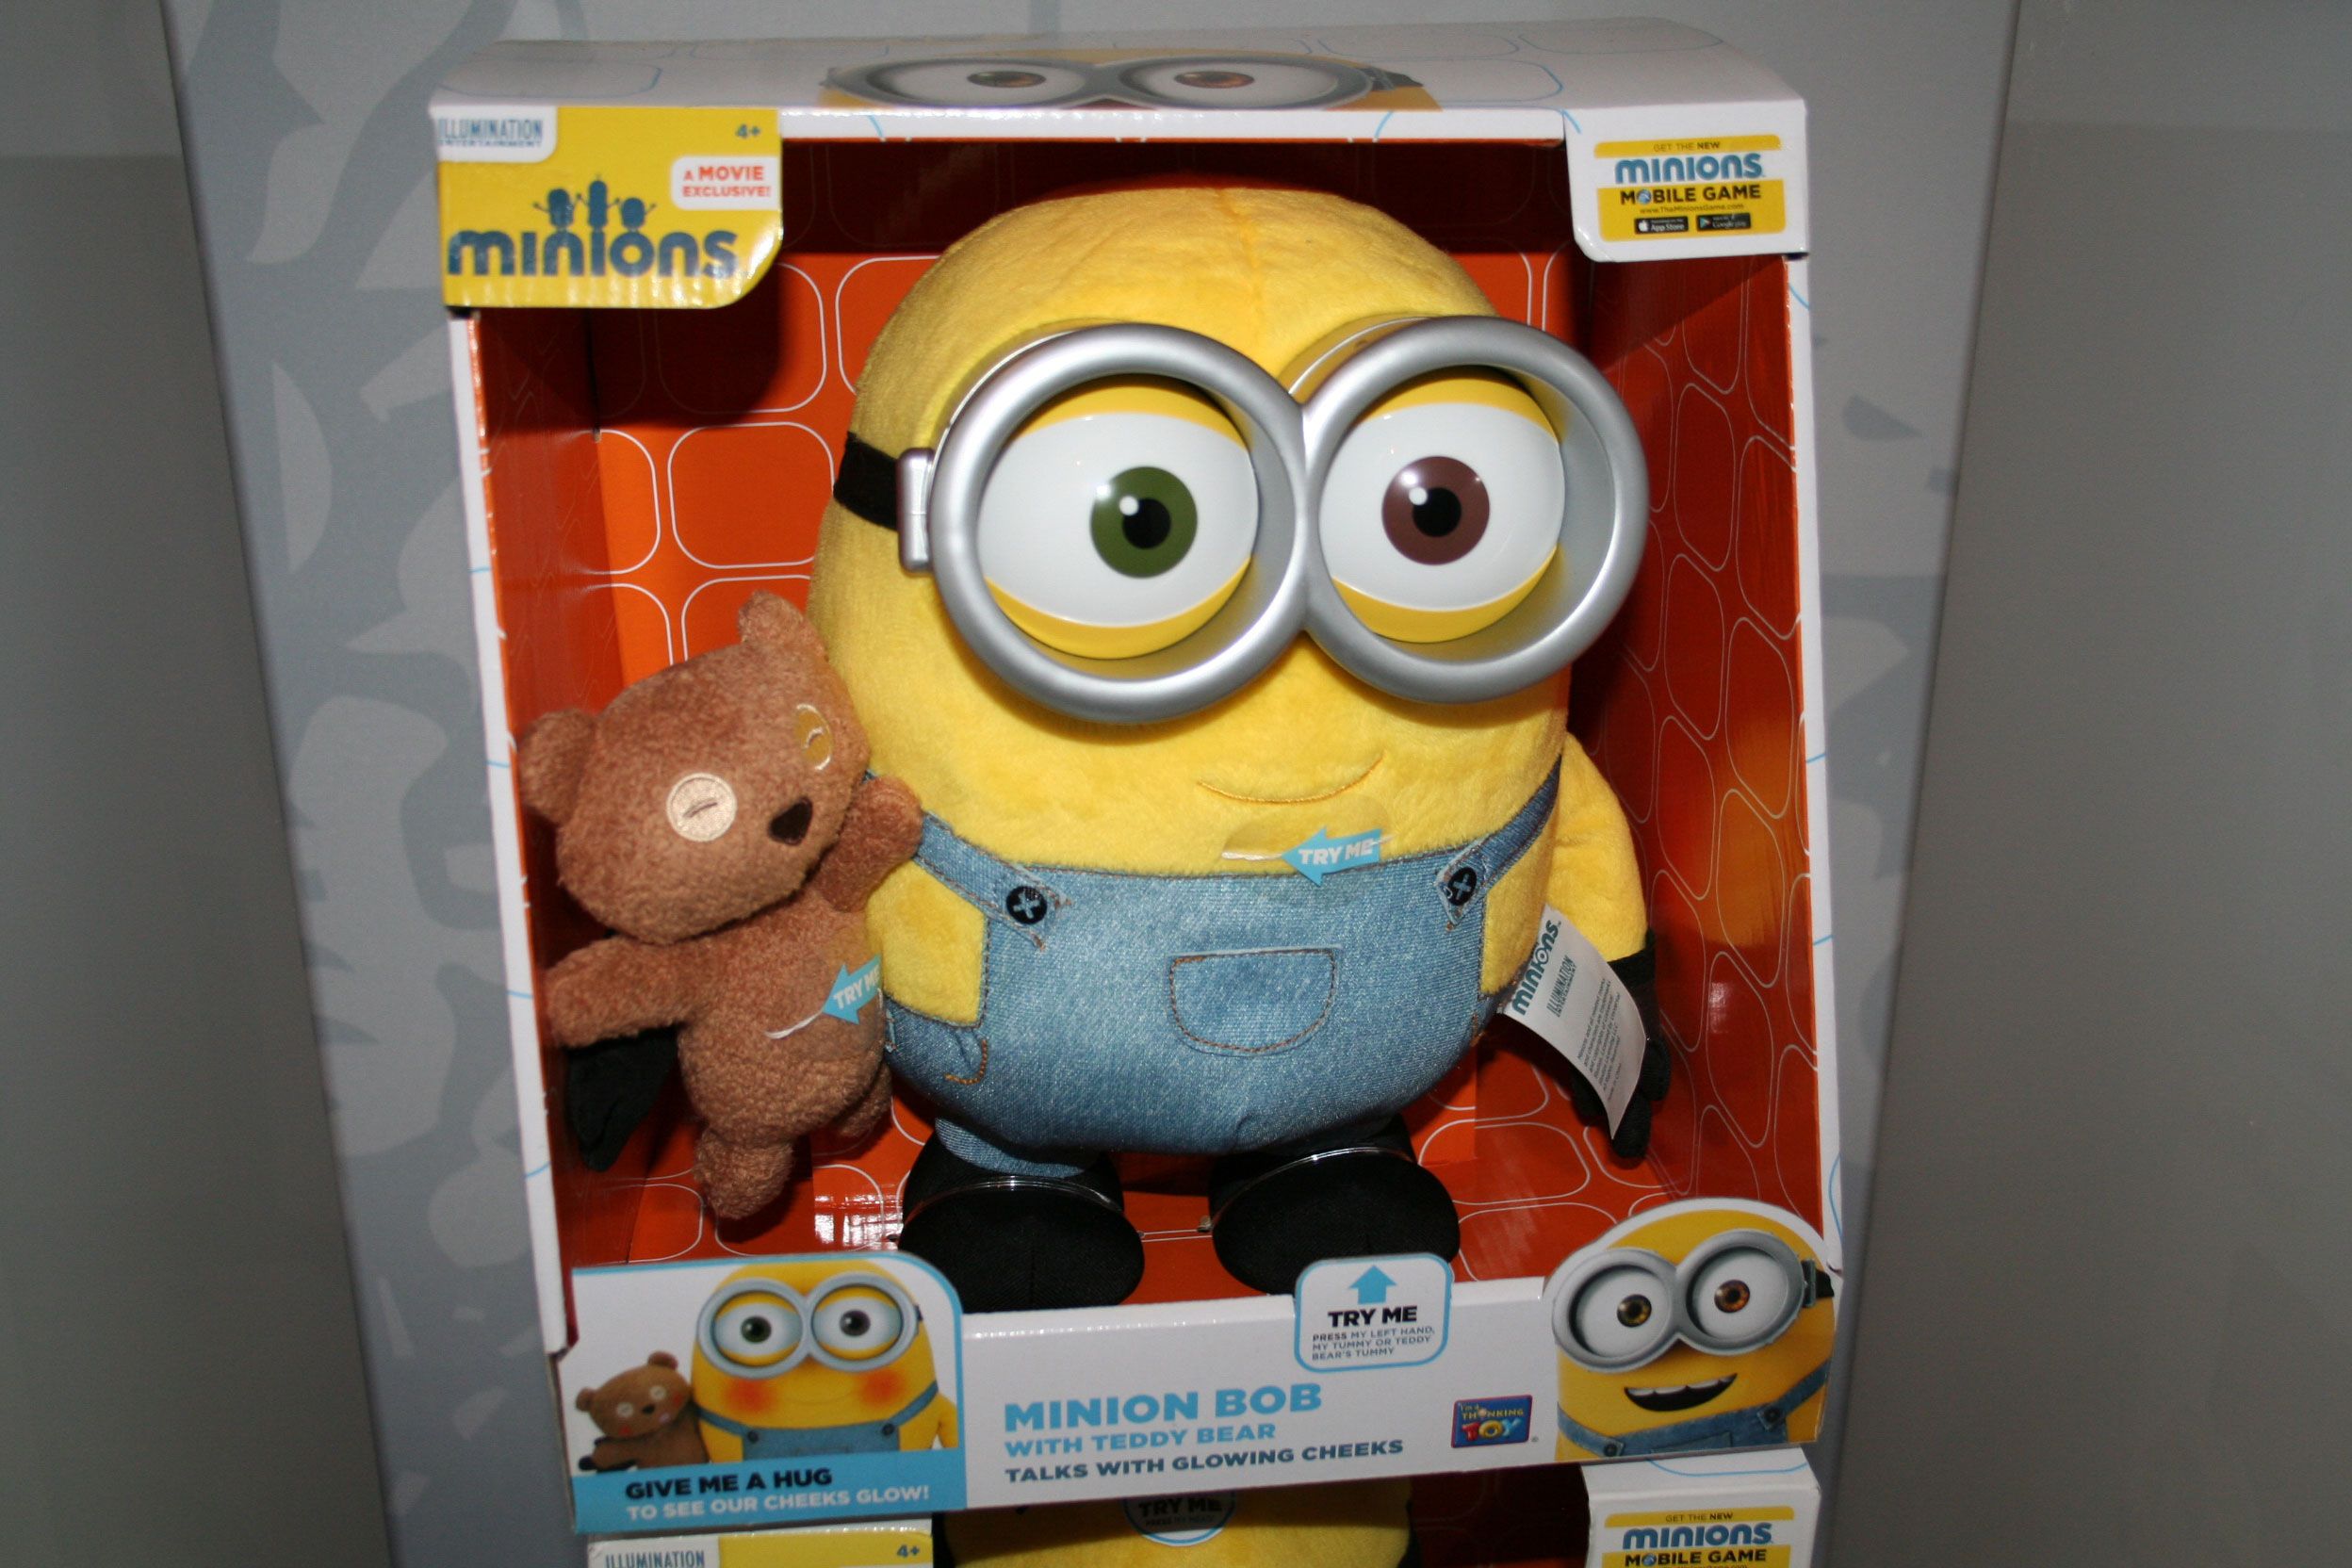 Minions Toys, Games, Apparel and More from Universal | Collider